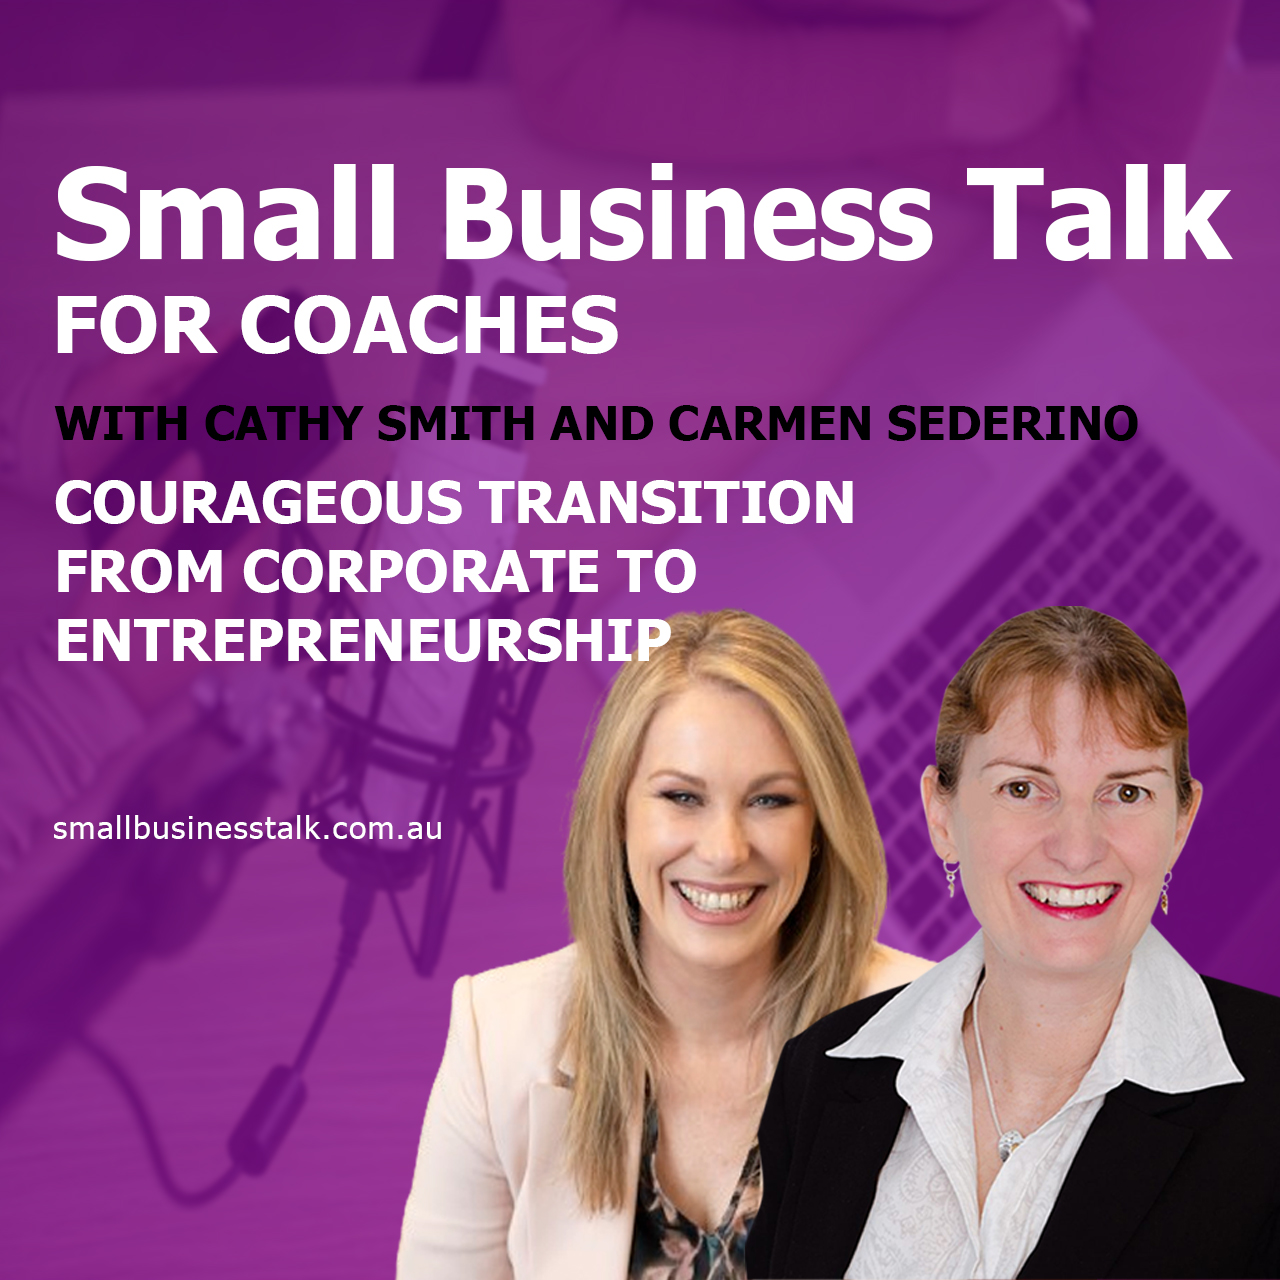 Courageous Transition From Corporate to Entreprenurship